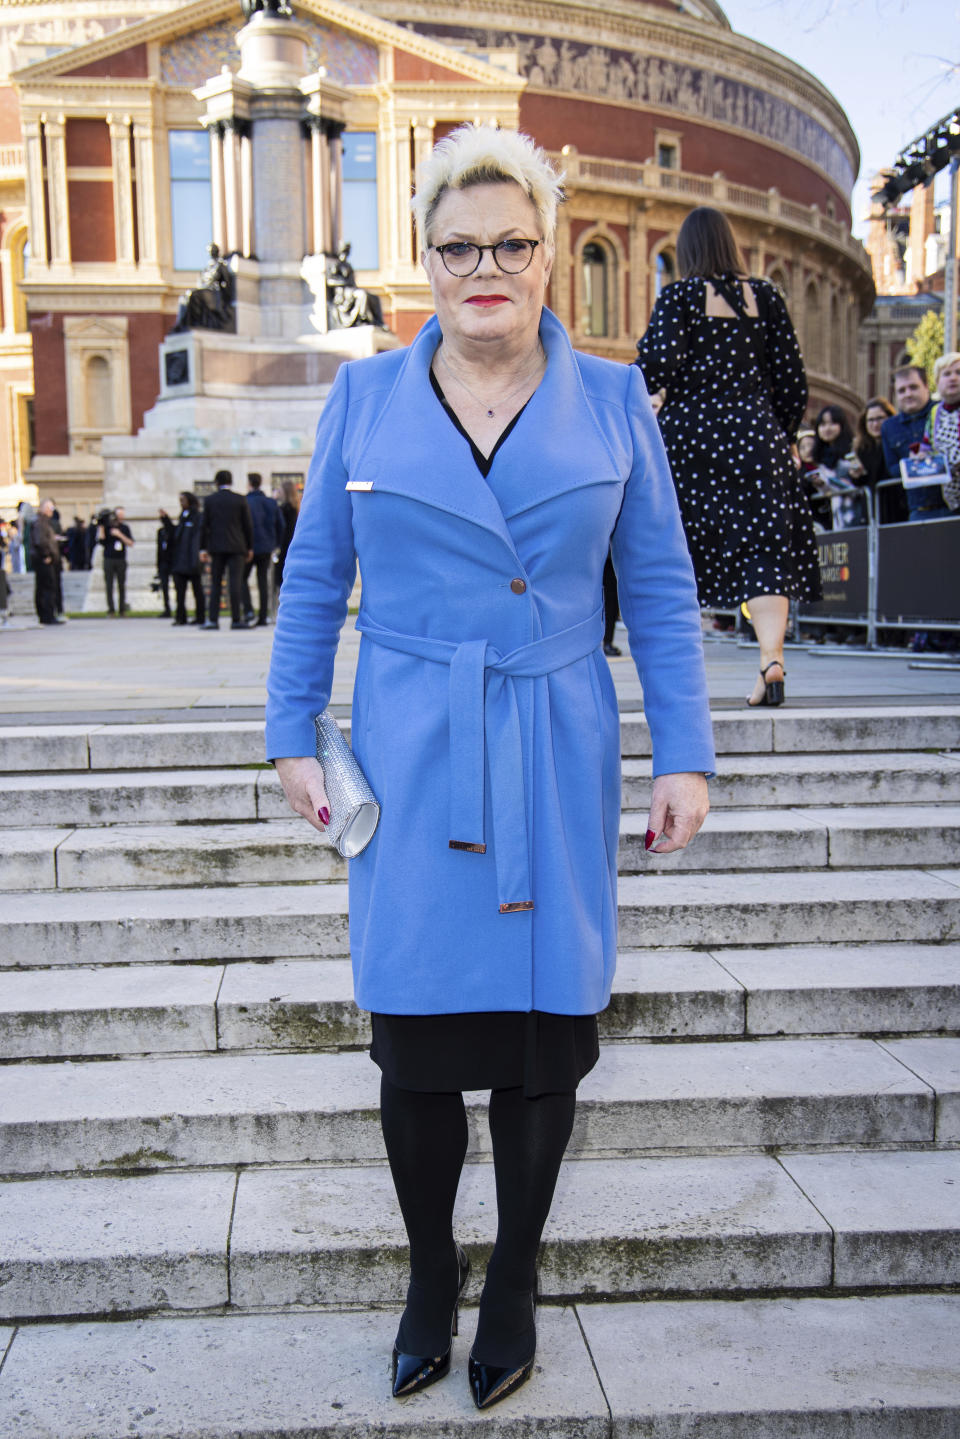 Suzy Eddie Izzard poses for photographers upon arrival at the Olivier Awards in London, Sunday, April 2, 2023. (Photo by Vianney Le Caer/Invision/AP)